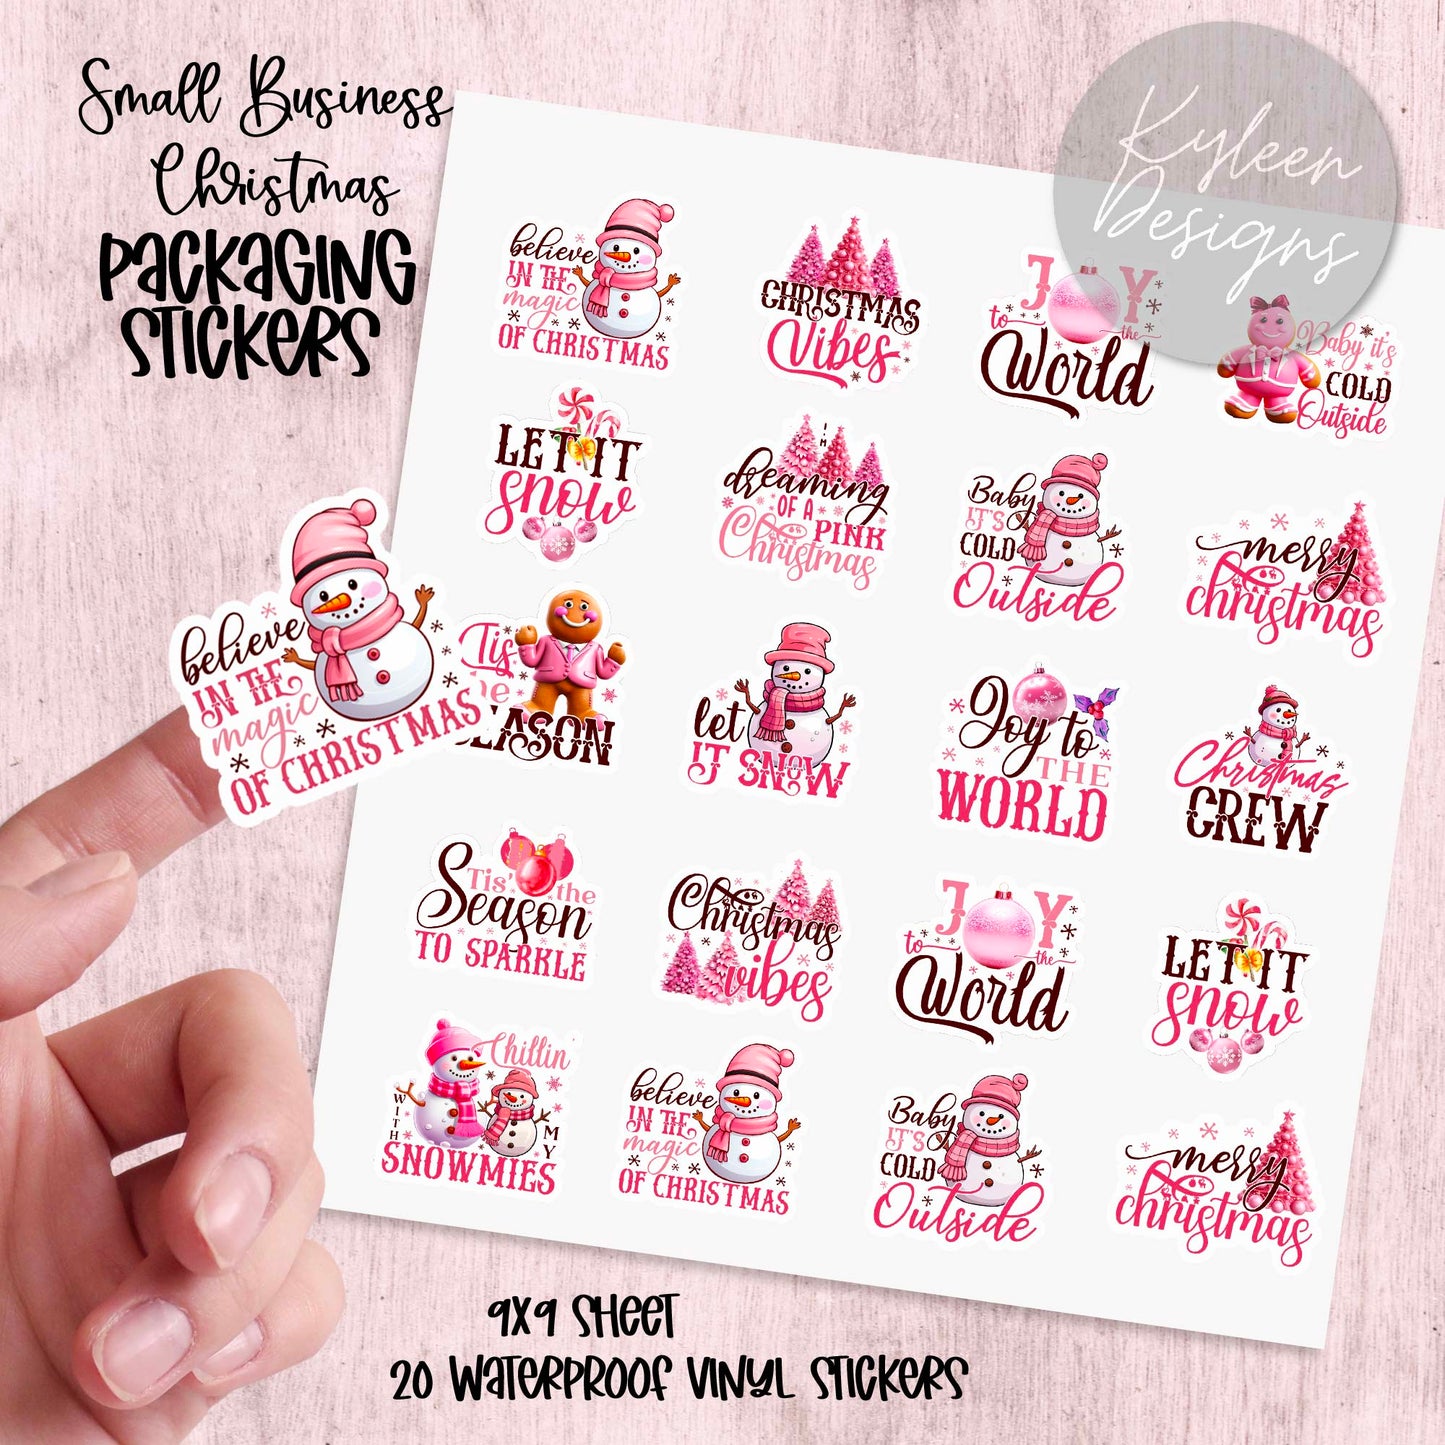 Christmas Small Business Packaging Stickers